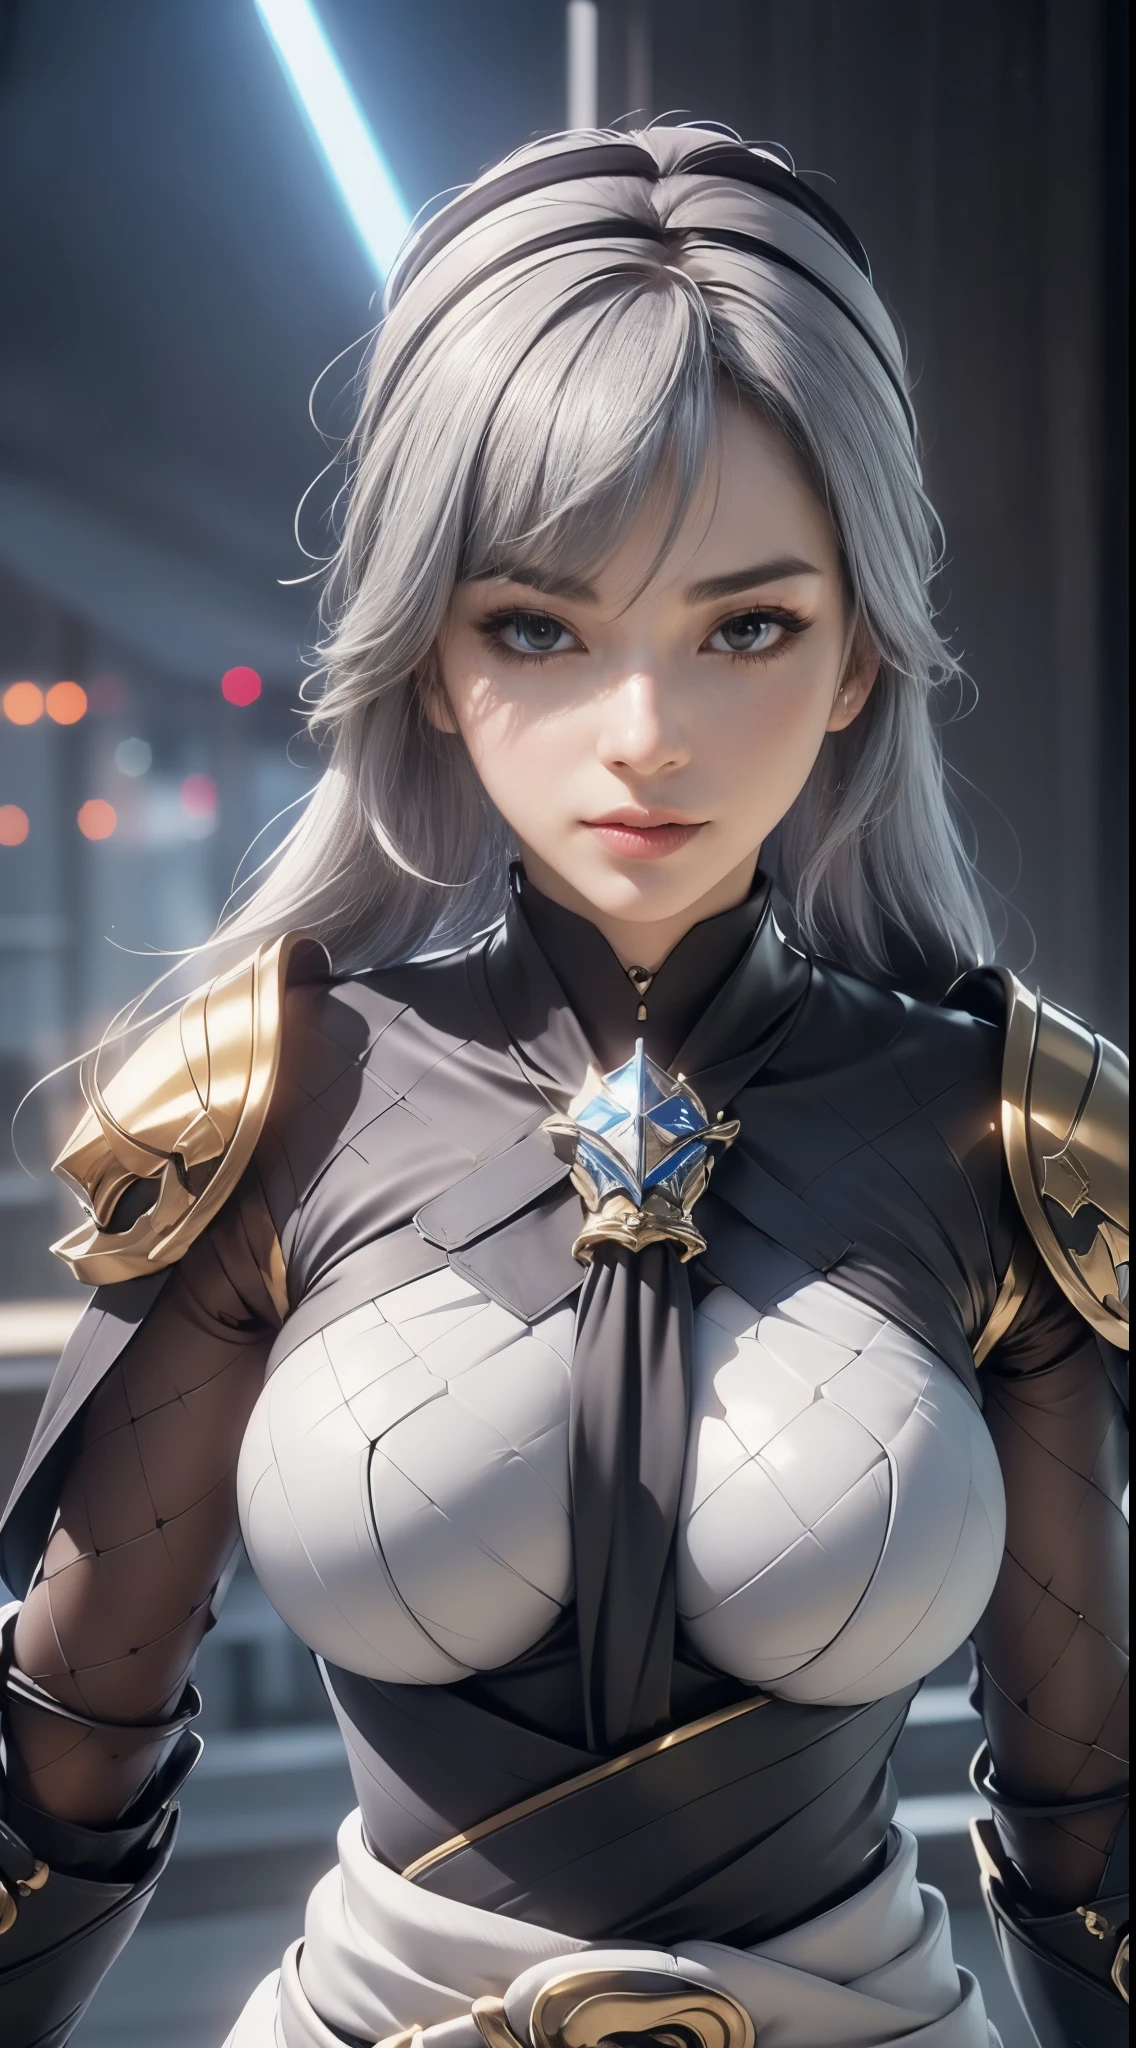 ((unreal enginee 5)), lifelike rendering, excellent, (Full Armor Body), (cloaks), (Helm), looking in camera, Stand in the studio, Beautiful face, makeup, CGI Mix, (Photorealism:1.2), Ultra-realistic UHD face, (Colossal tits), Slim waist, an hourglass figure, Half body, ((Glowing skin)), ((Shiny skin)), Realistic body, ((She has a )), ((Clean skin)), Photorealistic, Bokeh, Motion Blur, masutepiece, hight resolution, 1080p, Super Detail, Textured skin, (Sword at the waist), close up to upper body, silver hair, drill hair:0.4